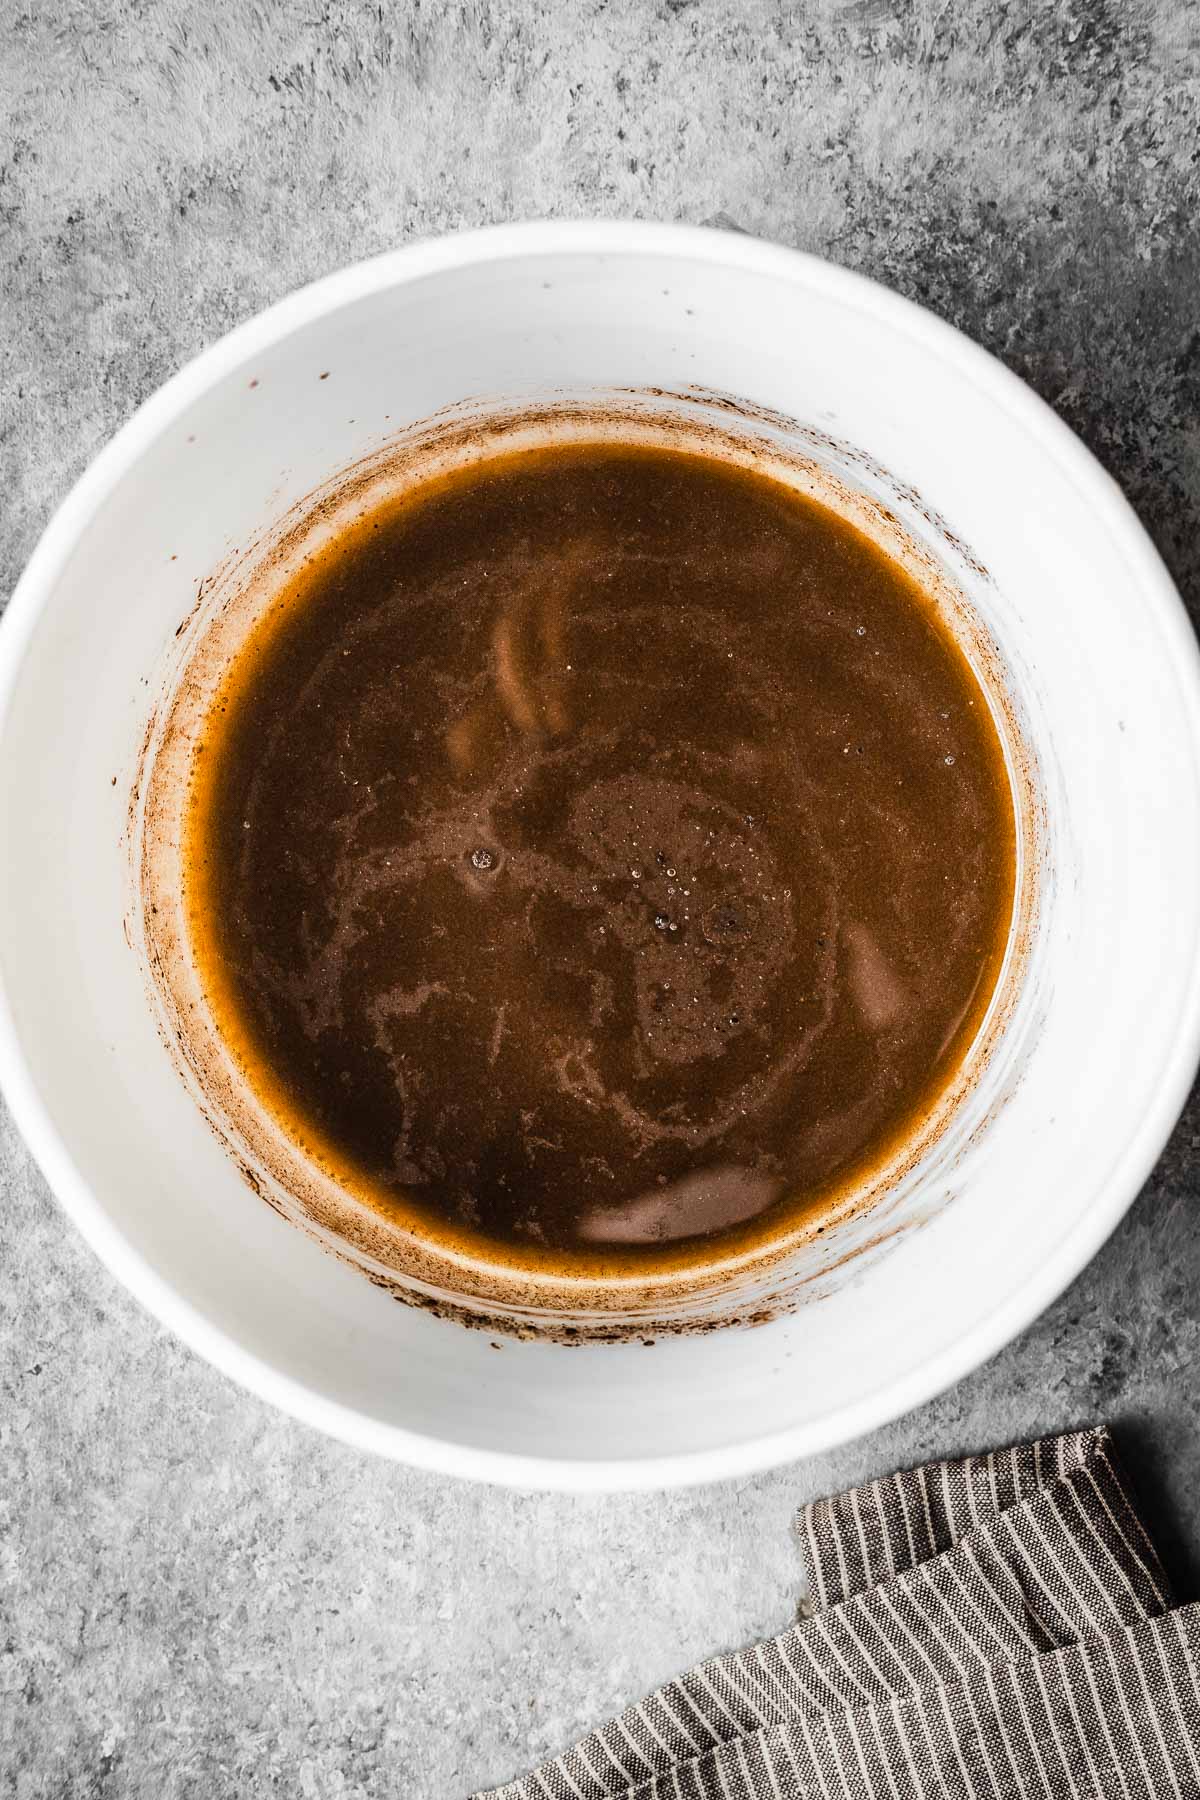 Melted butter, oil and cocoa powder in a white ceramic bowl.